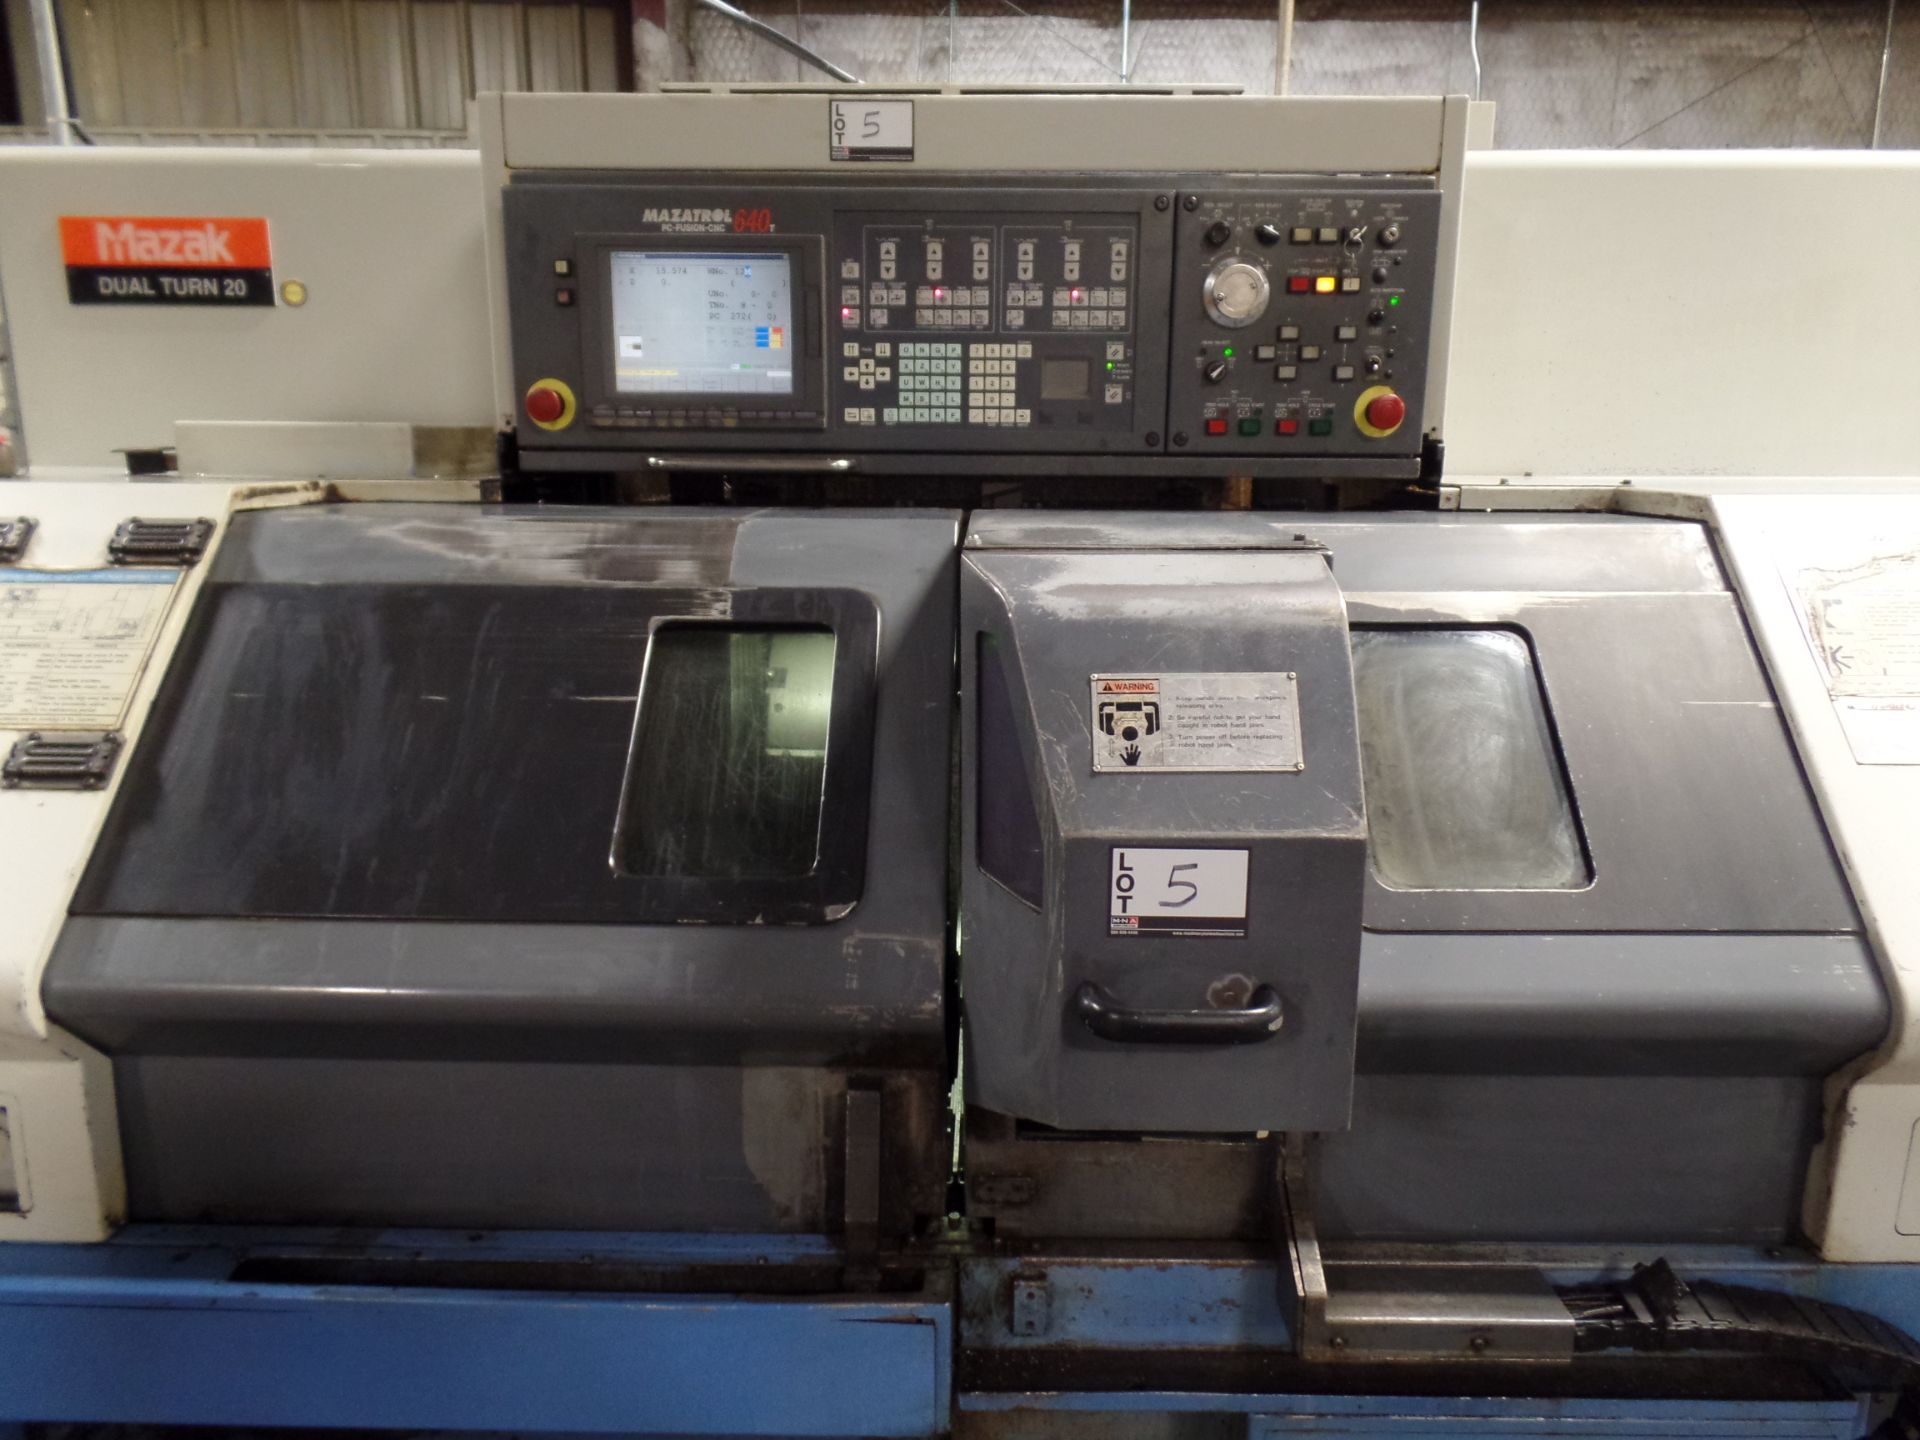 2002 Mazak Dual Turn 20 4 Axis Twin Spindle Twin Turret Opposed CNC Turning Center, rear discharge - Image 10 of 14